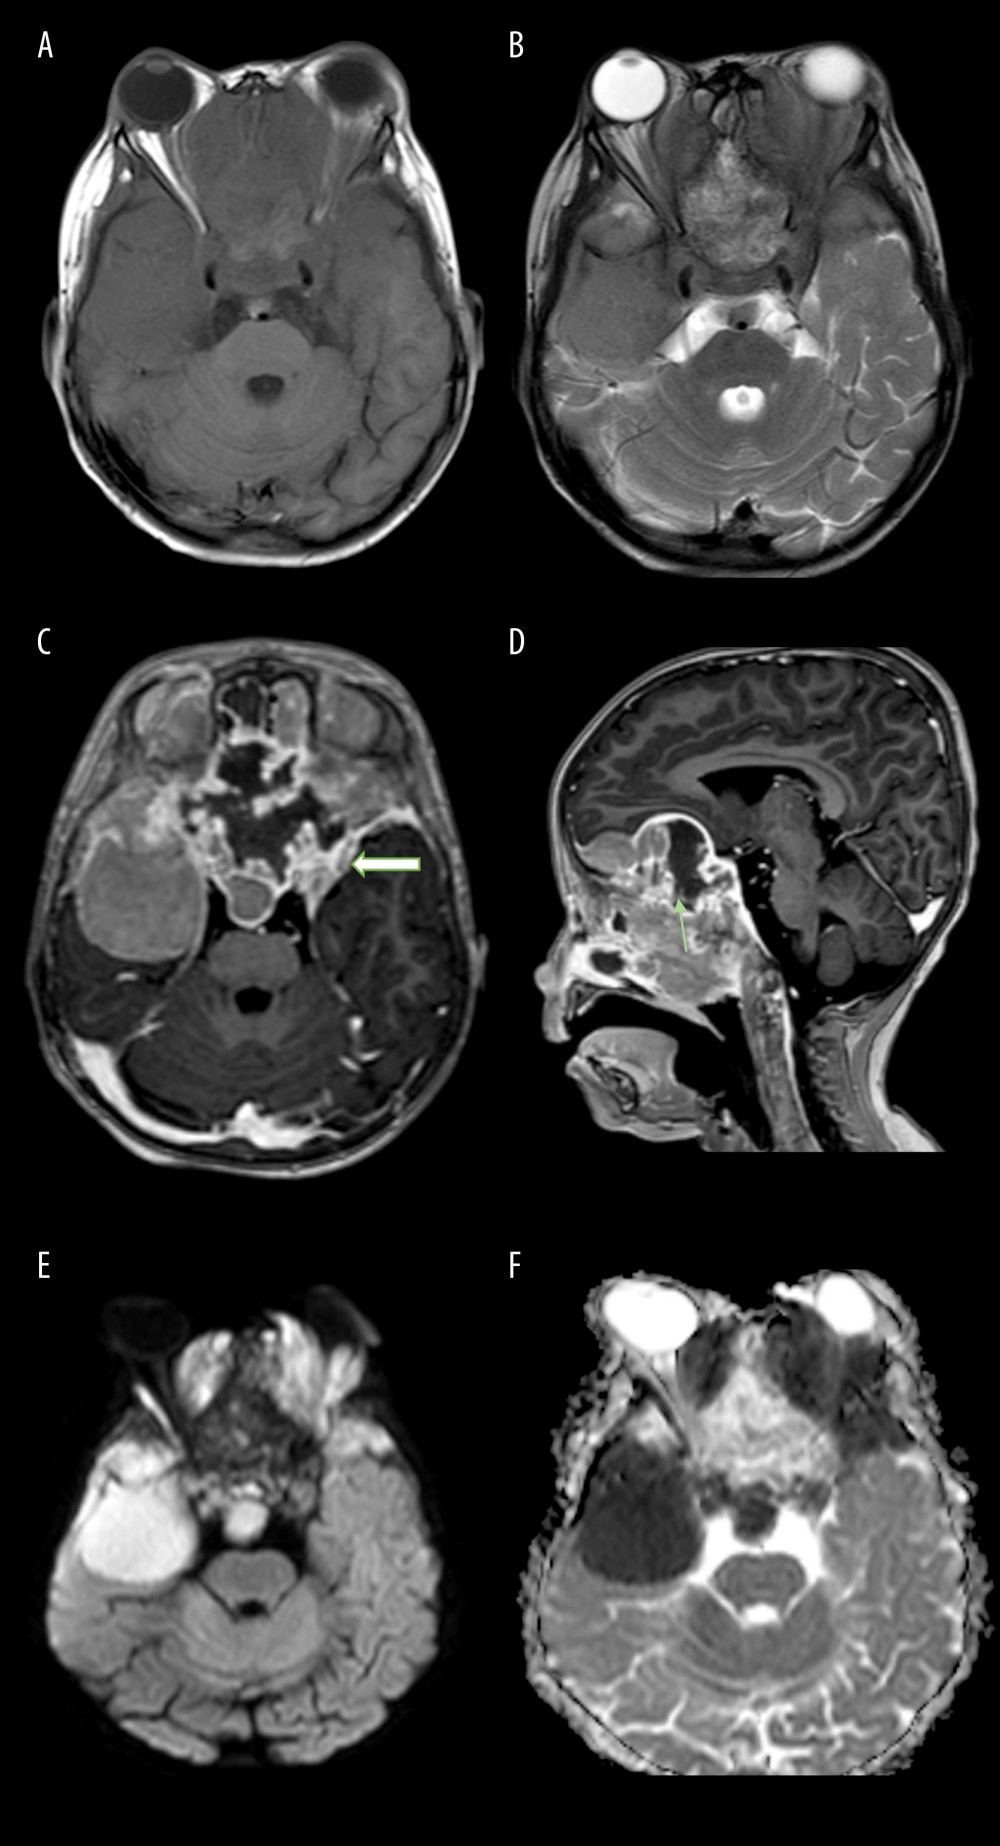 Magnetic resonance imaging of brain in (A) T1-weighted images and (B) T2-weighted images in axial section showing a predominantly T1 isointense and heterogeneous T2 hyperintense mass. Post-contrast T1 images in the (C) axial and (D) sagittal view showing a solid and cystic nasal mass (green arrow) involving both temporal bones and extending intracranially with dura thickening and enhancement (white arrow block). This mass demonstrates a significant fluid restriction seen in (E) diffusion-weighted images and (F) apparent diffusion coefficient sequences.